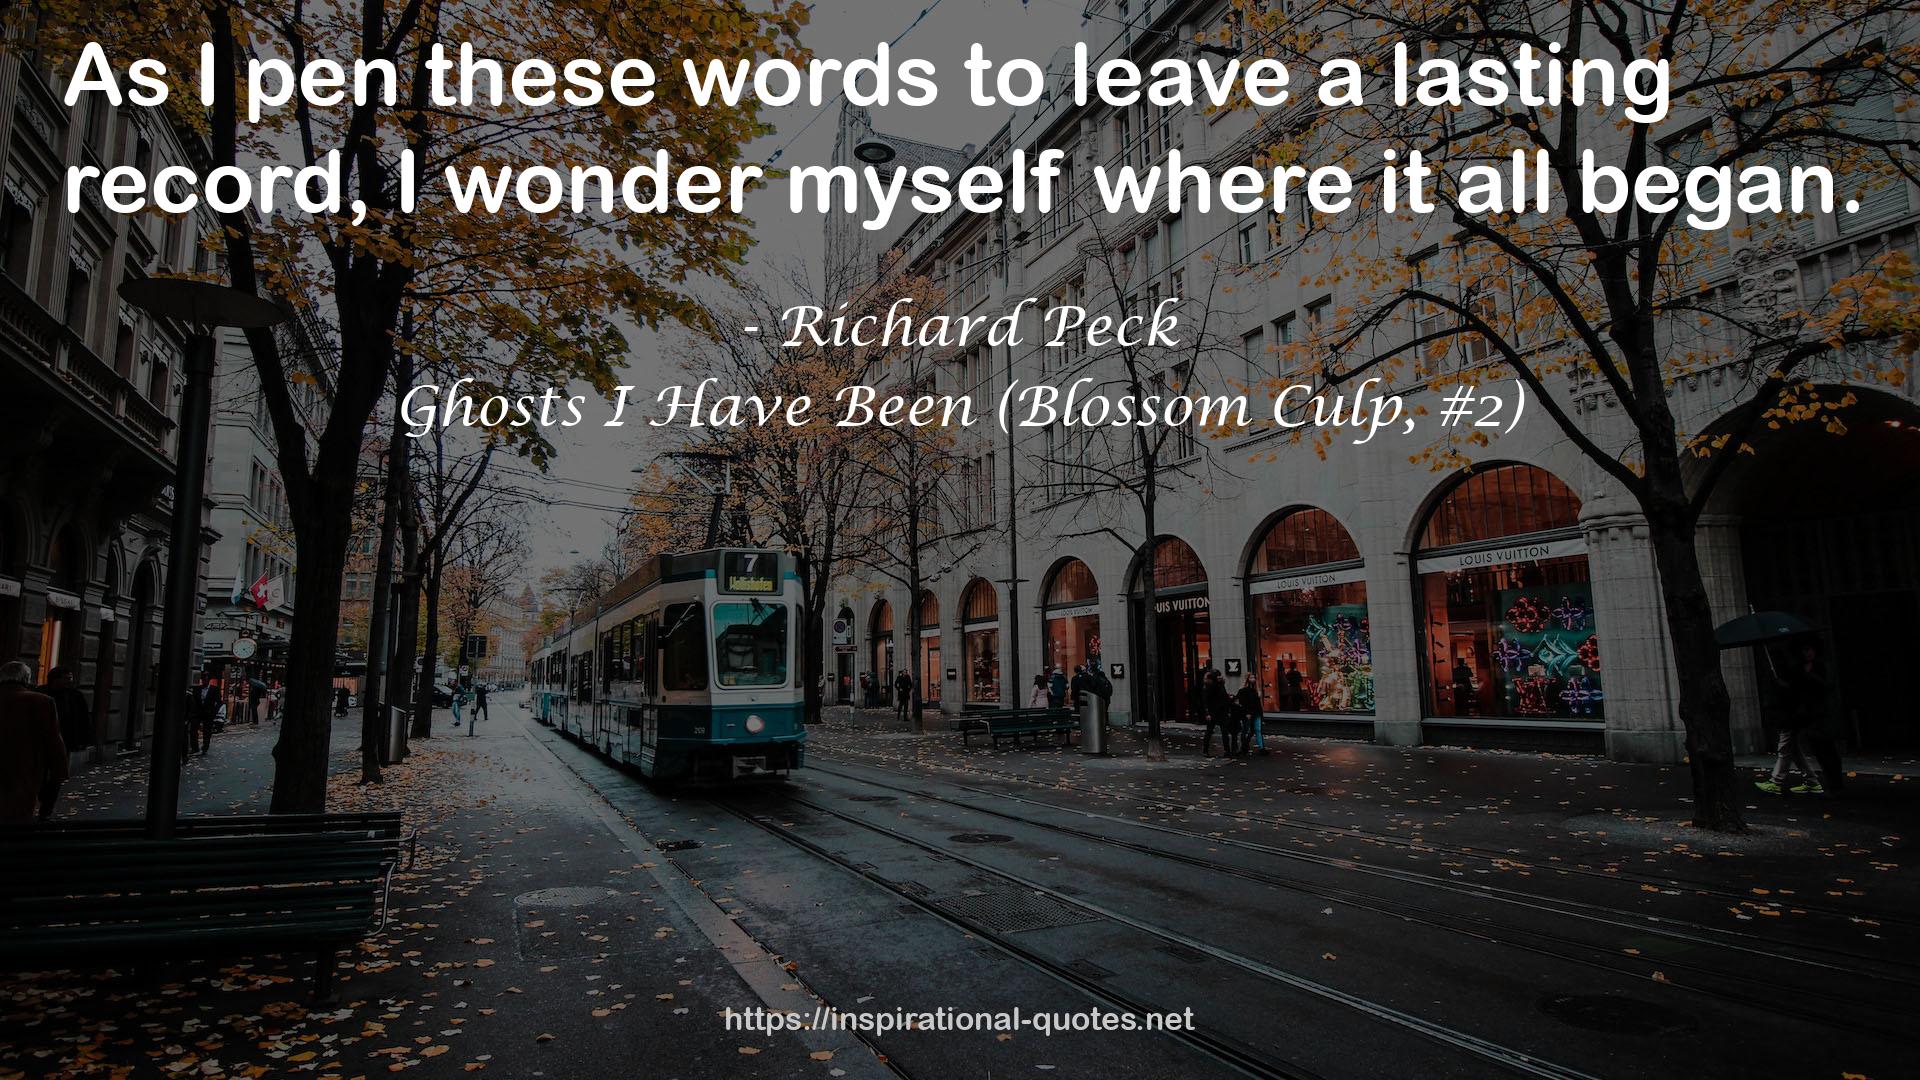 Ghosts I Have Been (Blossom Culp, #2) QUOTES